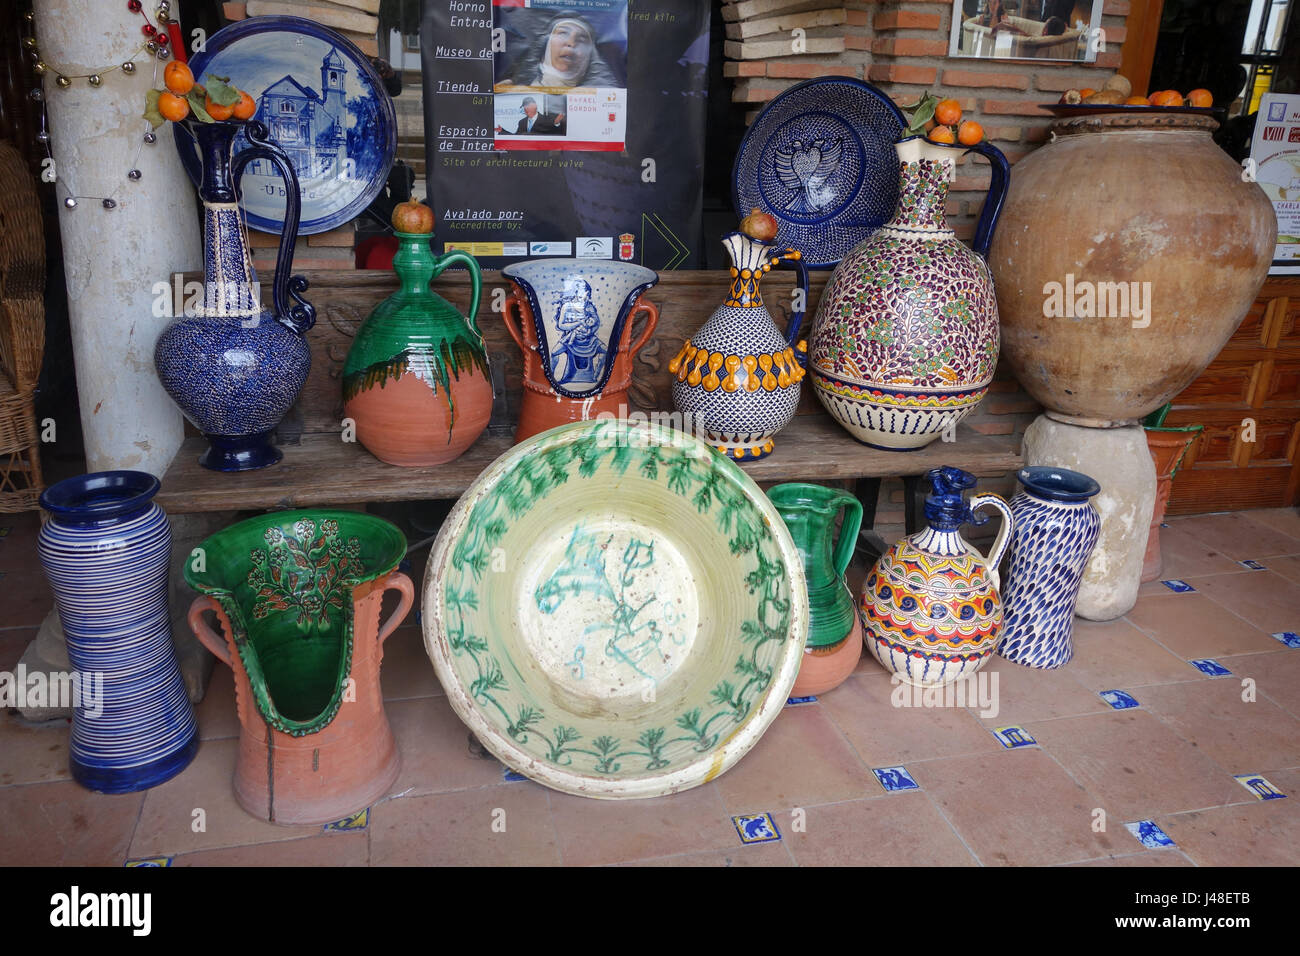 Spanish pottery on sale in Ubeda in Andalusia Spain Stock Photo